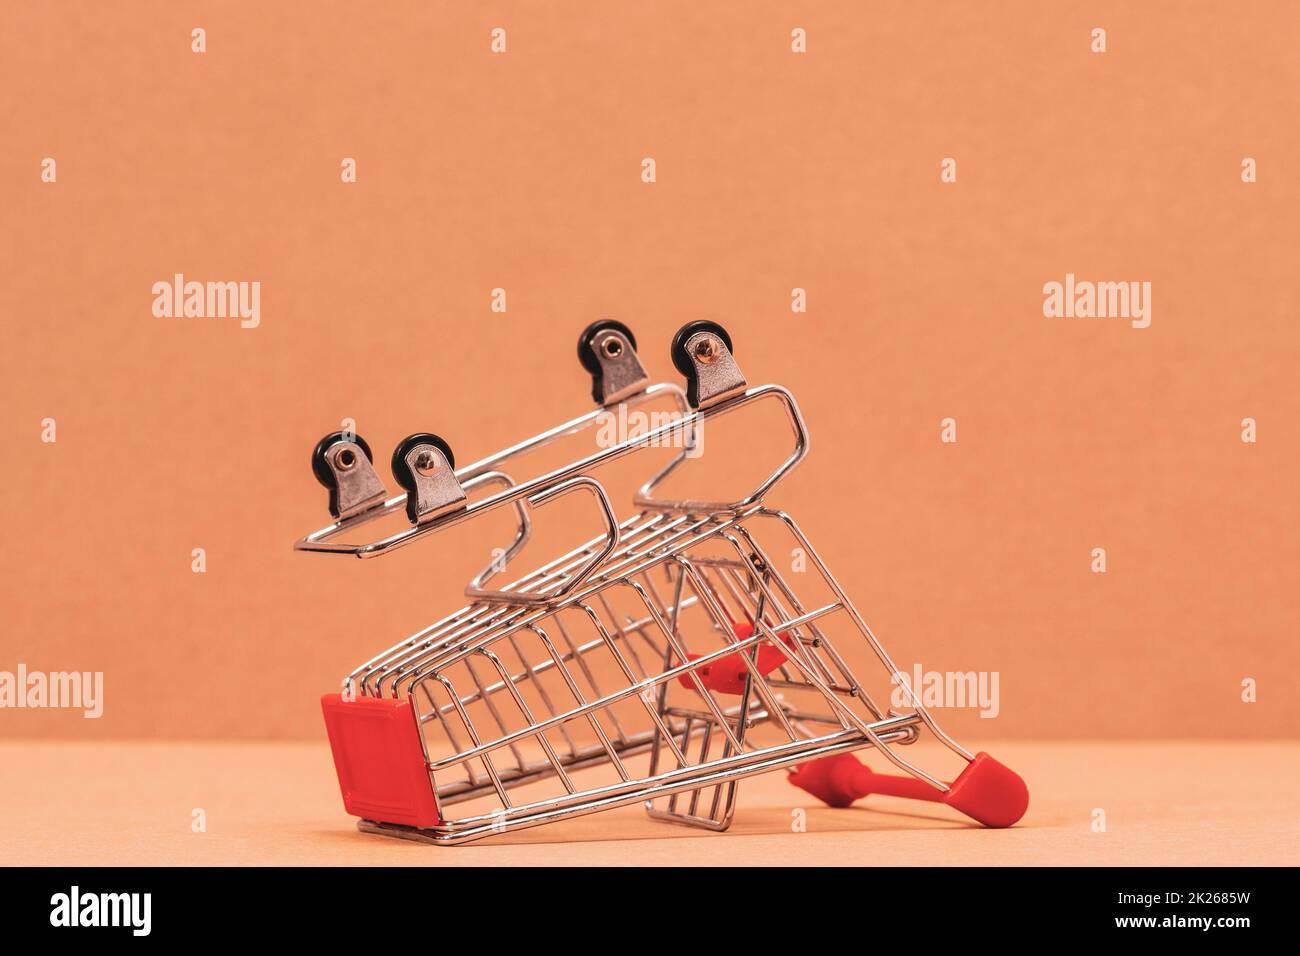 Shopping cart is upturned Stock Photo